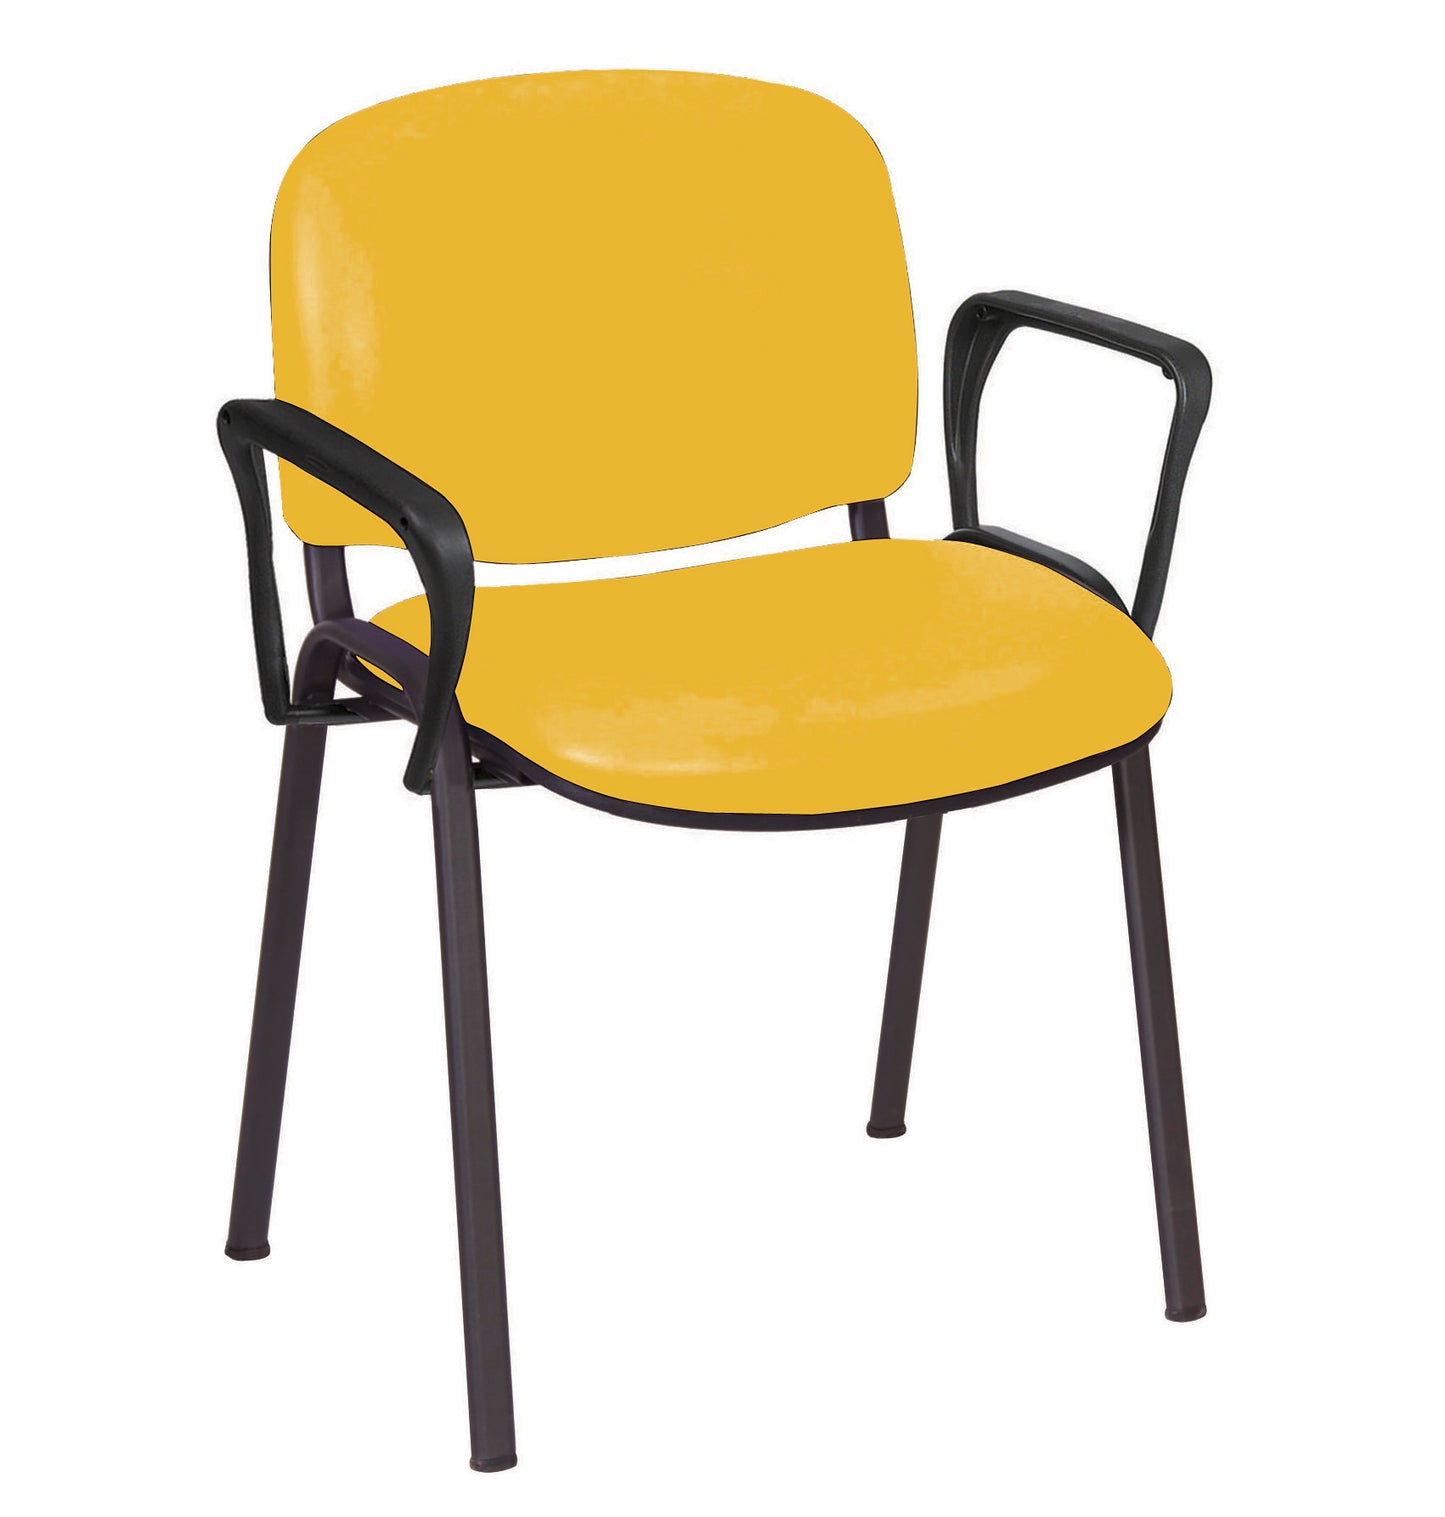 Sunflower - Galaxy Waiting Room Chair With Arms